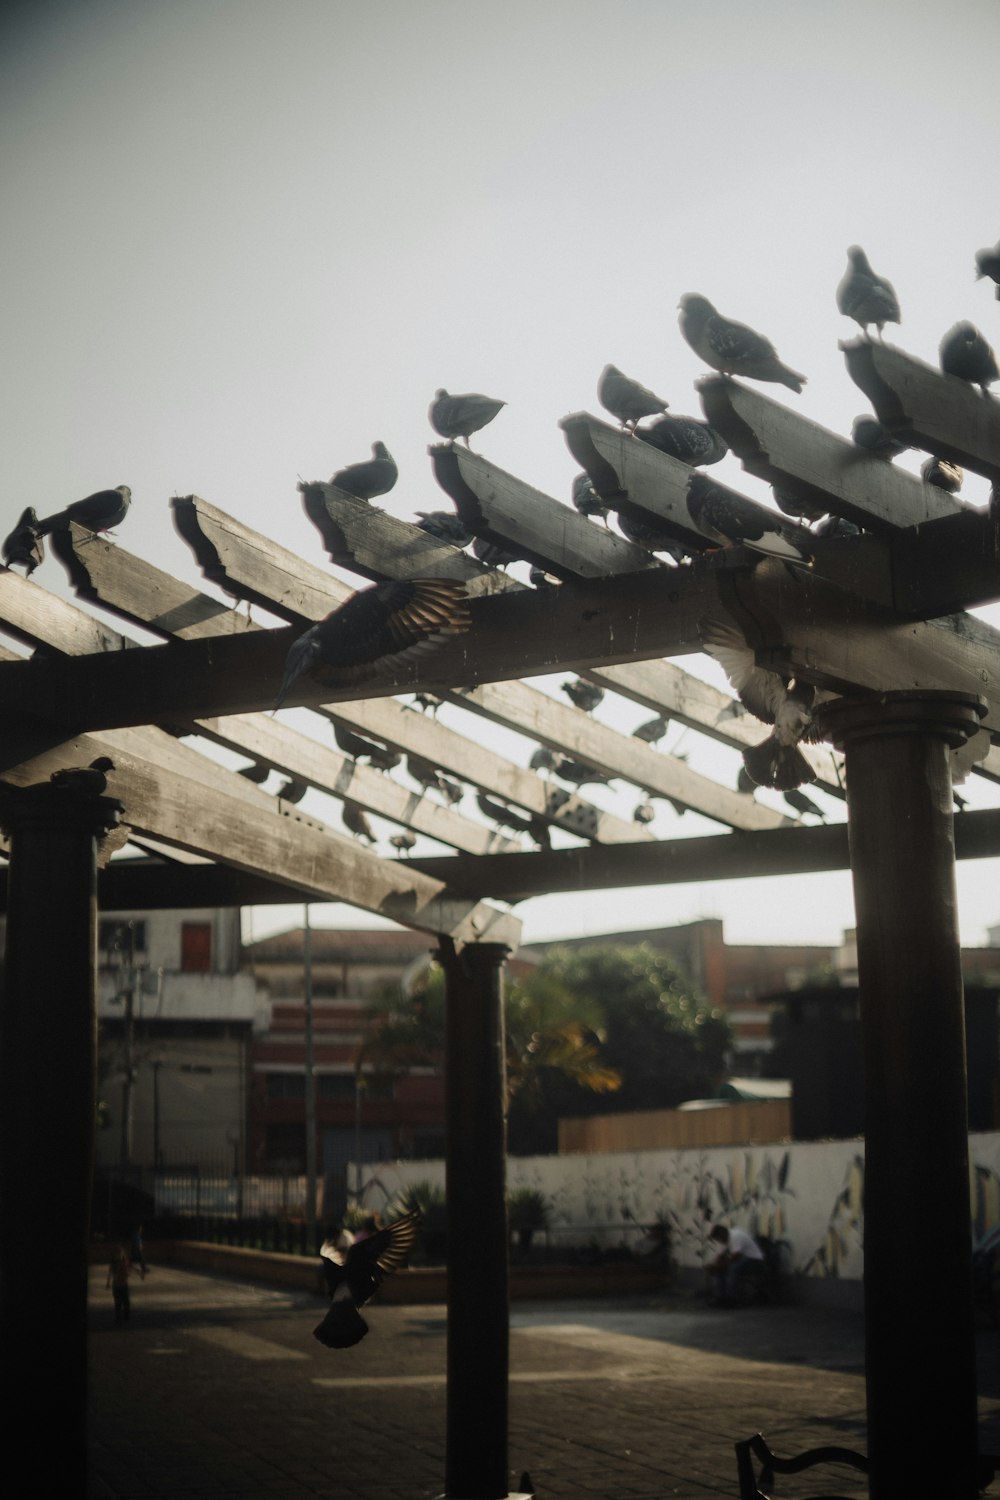 a group of birds sitting on top of a wooden structure